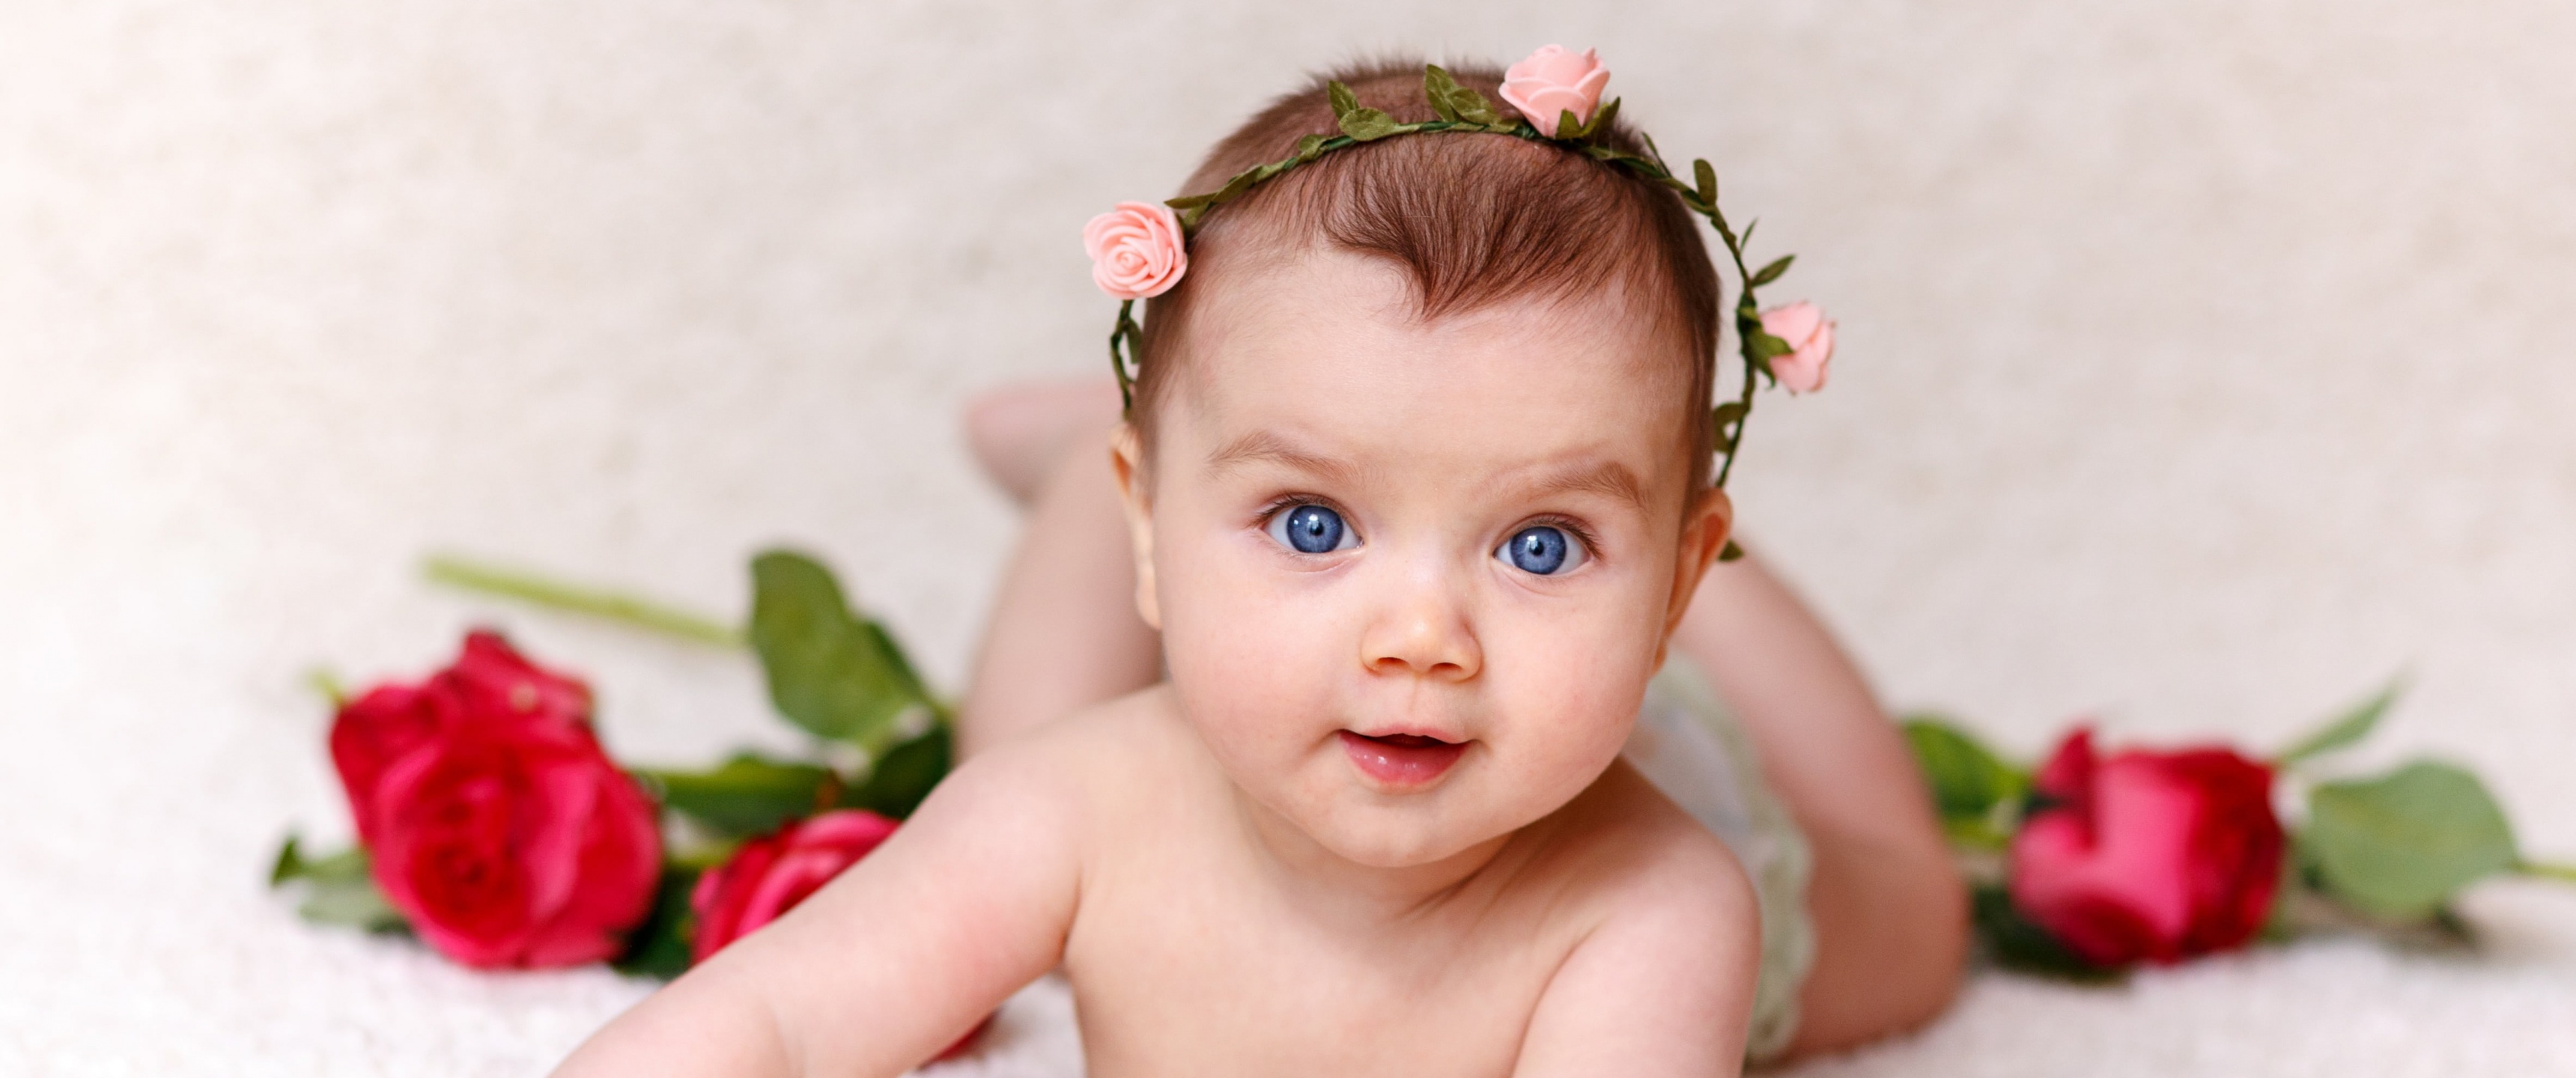 Cute baby girl 1080P 2k 4k HD wallpapers backgrounds free download   Rare Gallery